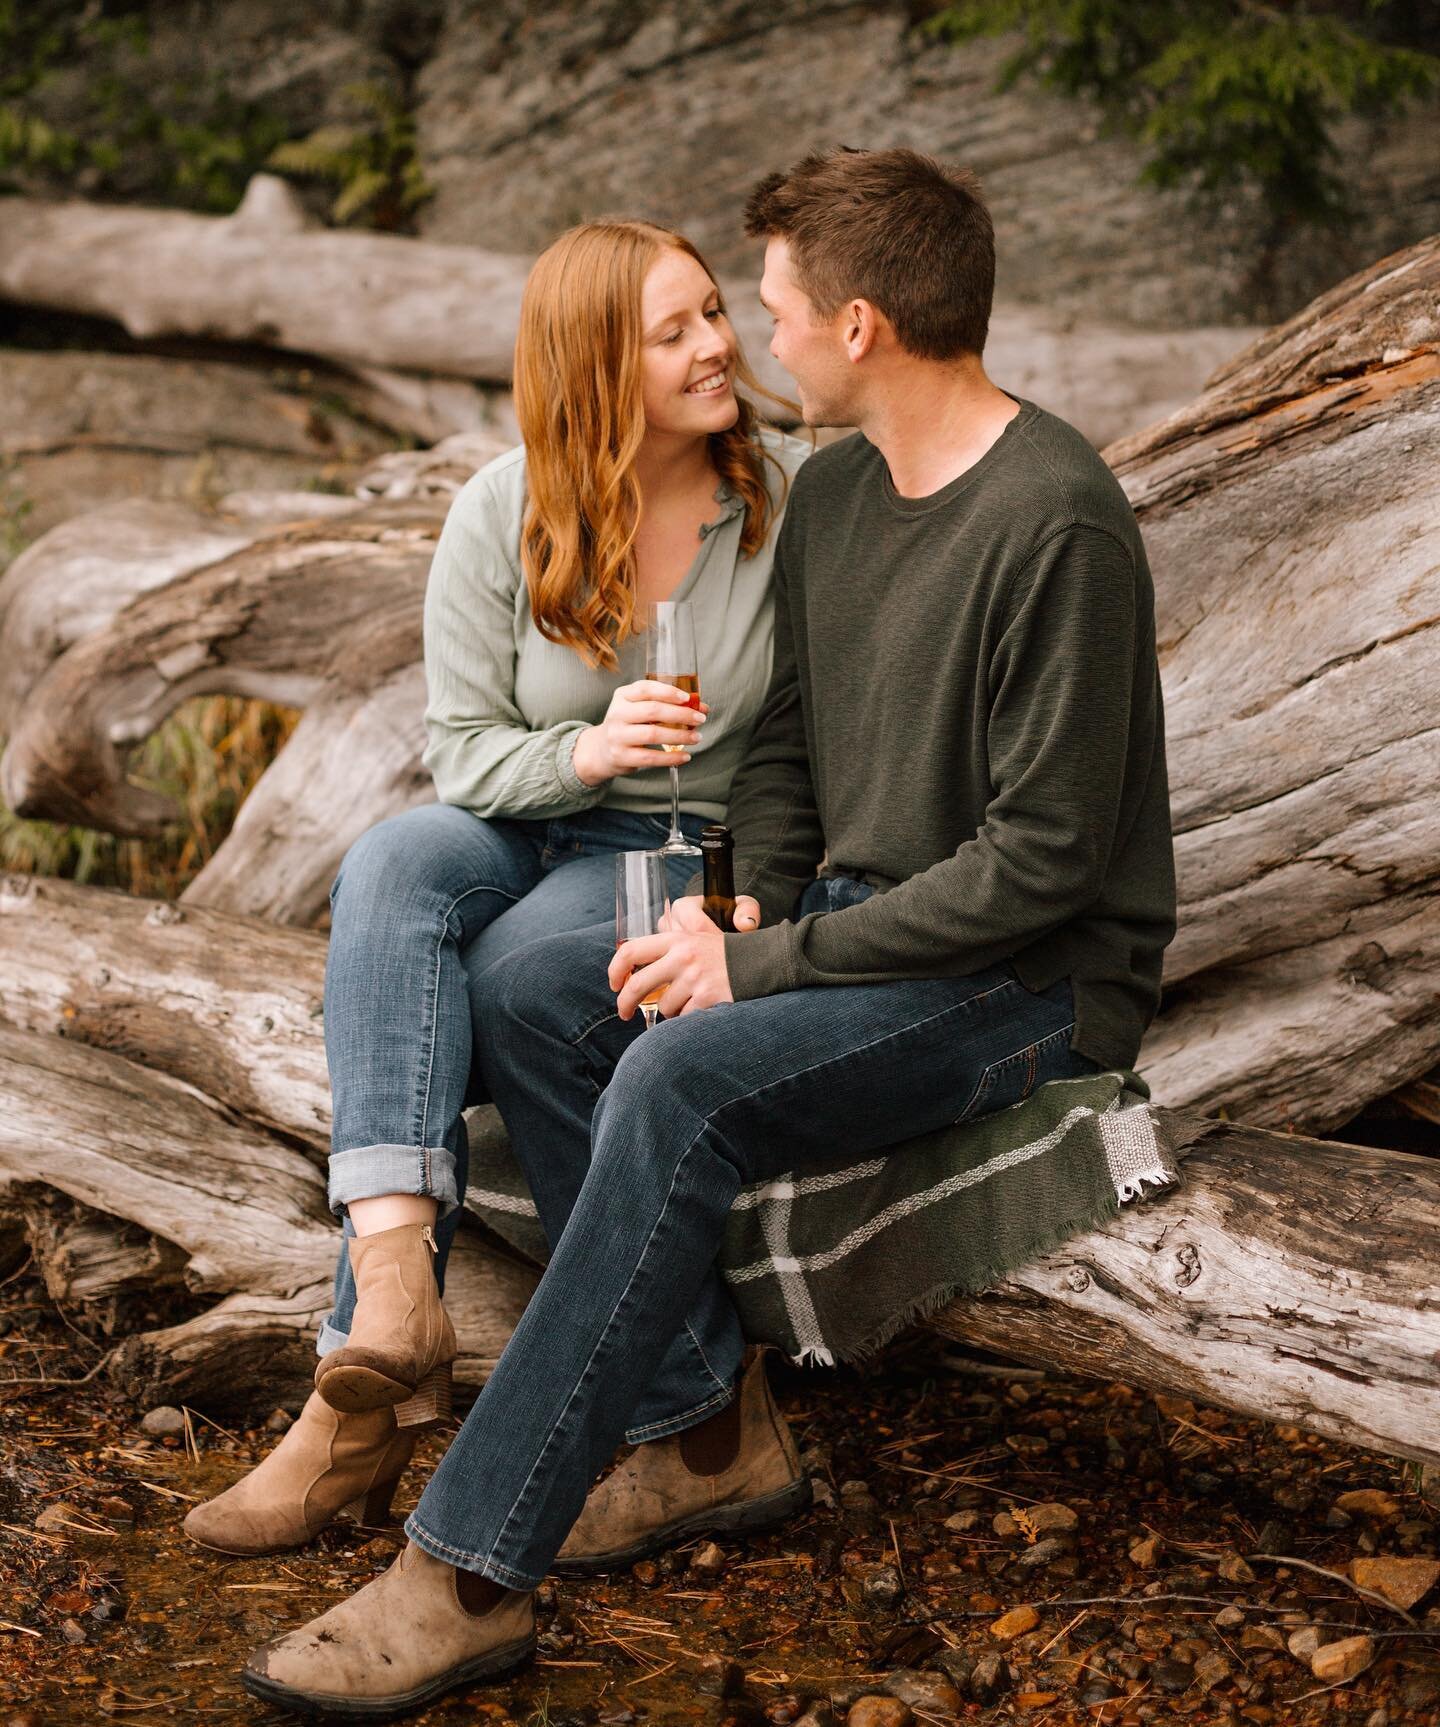 Catching up posting some fall sessions before the snow hits 😅 A lovely engagement shoot for C + T ❤️ 
I may have lead them down a wrong path to get to this spot, but they stuck with me 🤣 Ended up being a little of bit extra time getting to know the